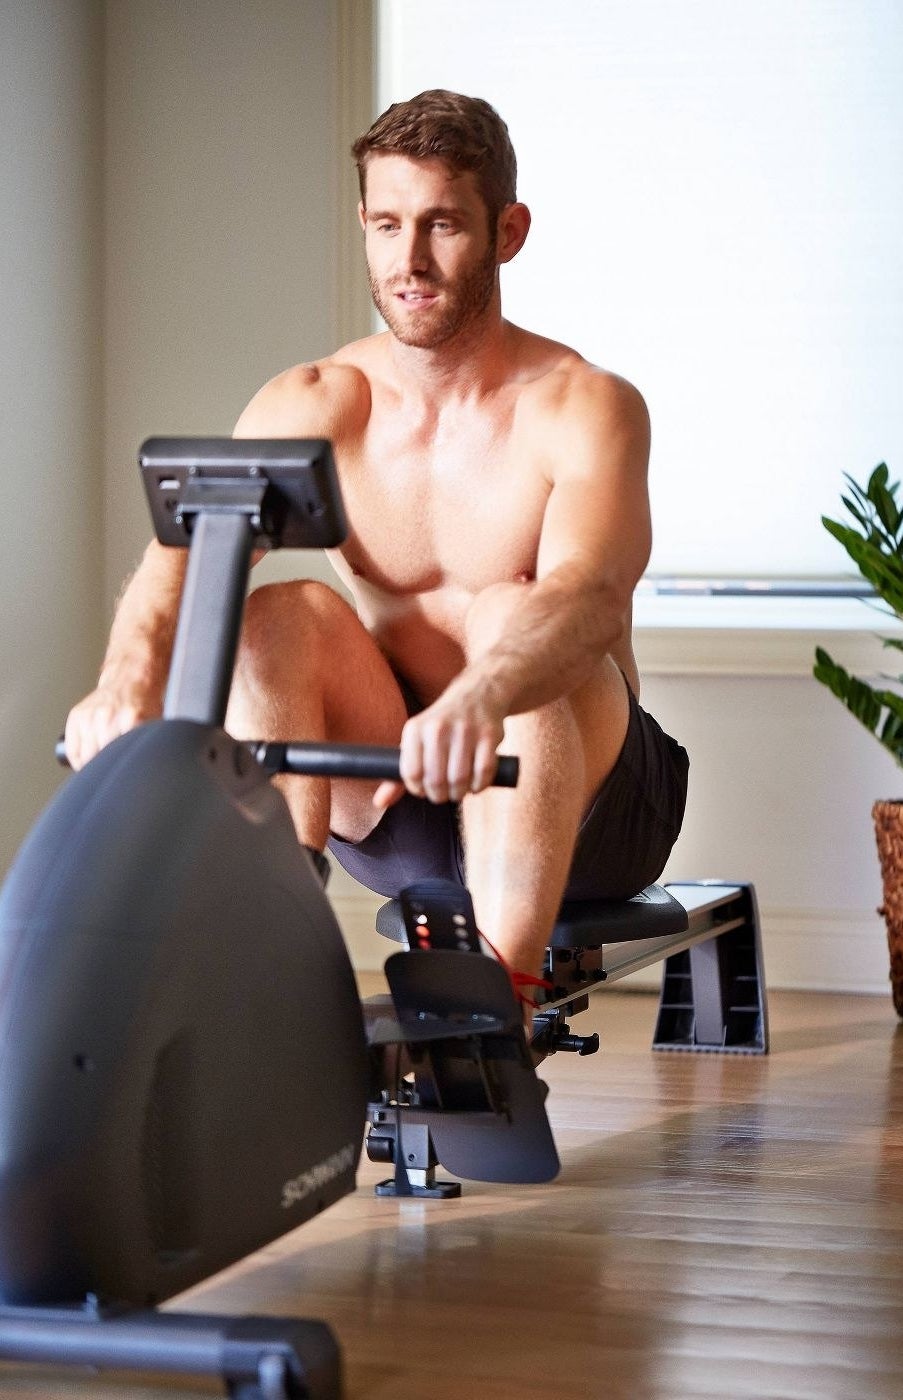 model using the rowing machine